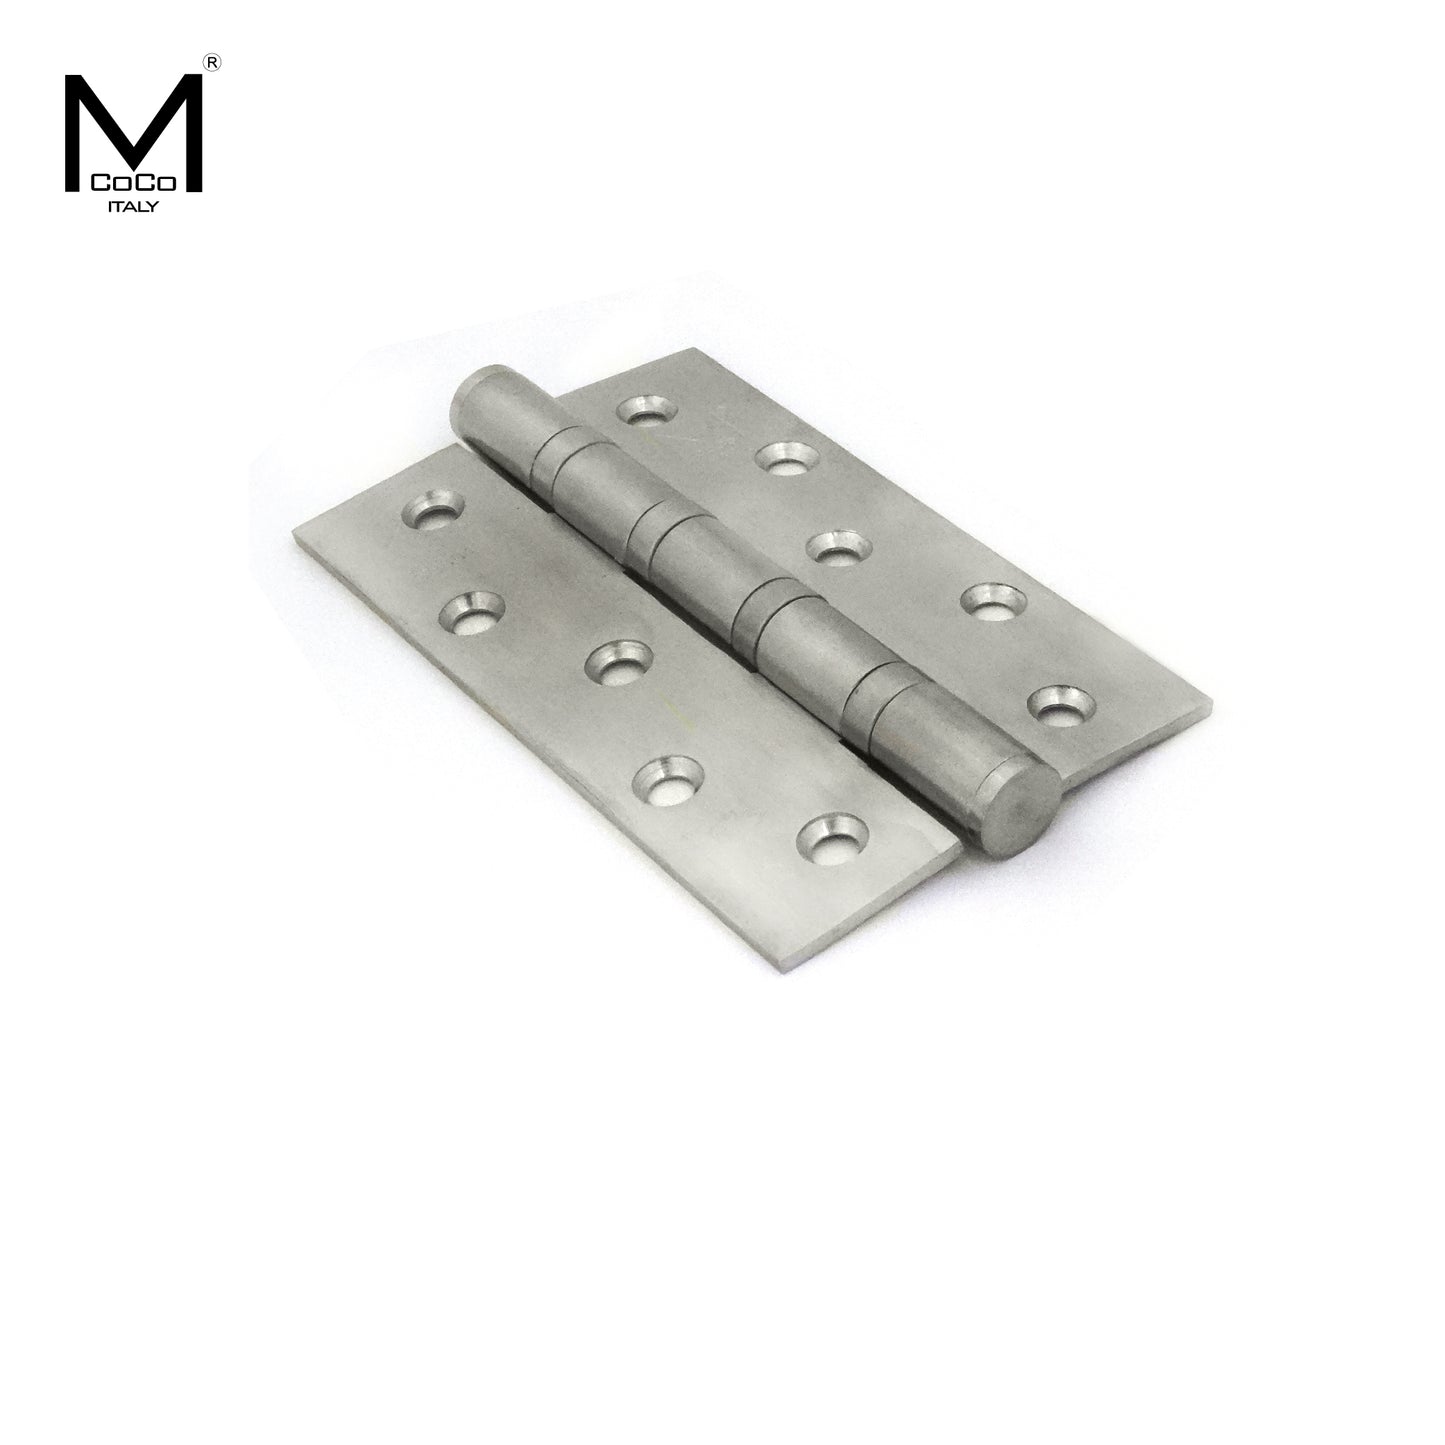 Mcoco Door Hinges With Two Ball Bearing, Size 3x2 to 6x6 Inches, Stainless Steel & Antique Brass Finish - GS